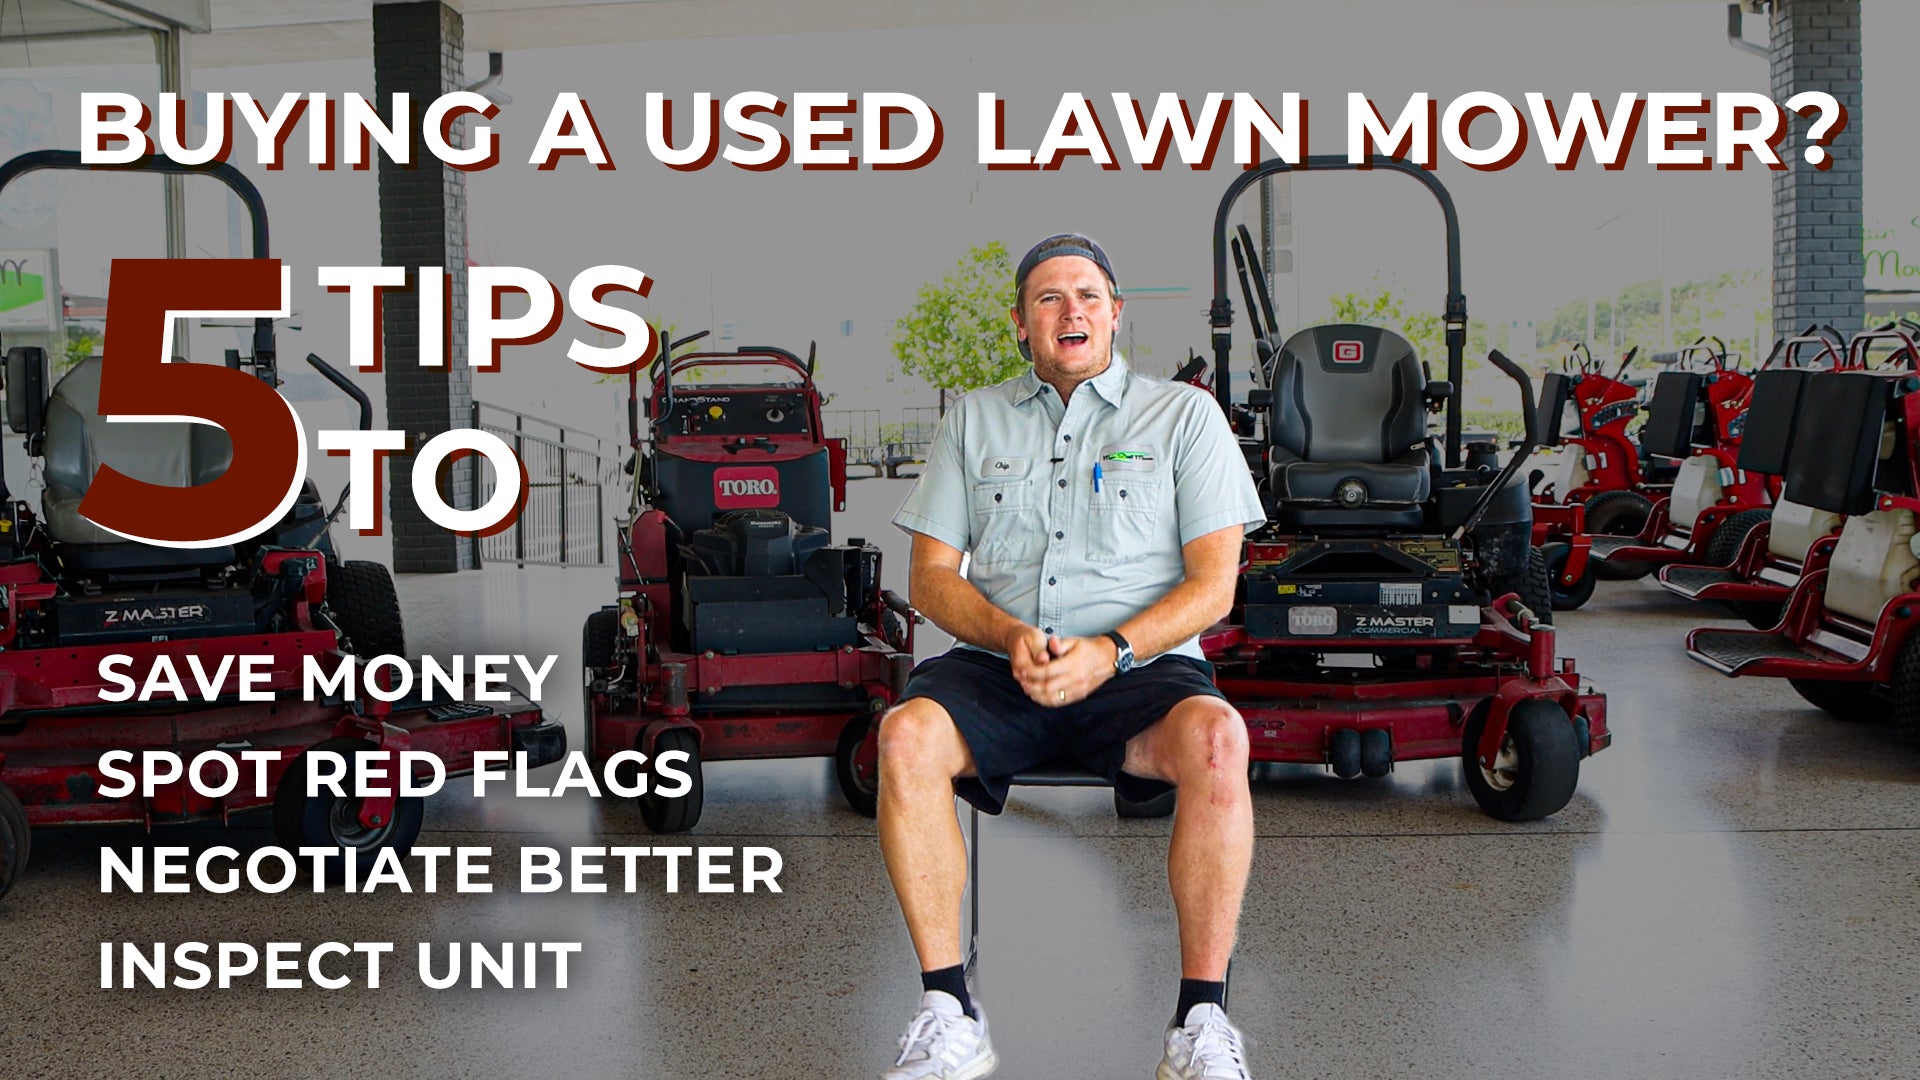 Top 5 Tips for when buying a Used Lawn Mower